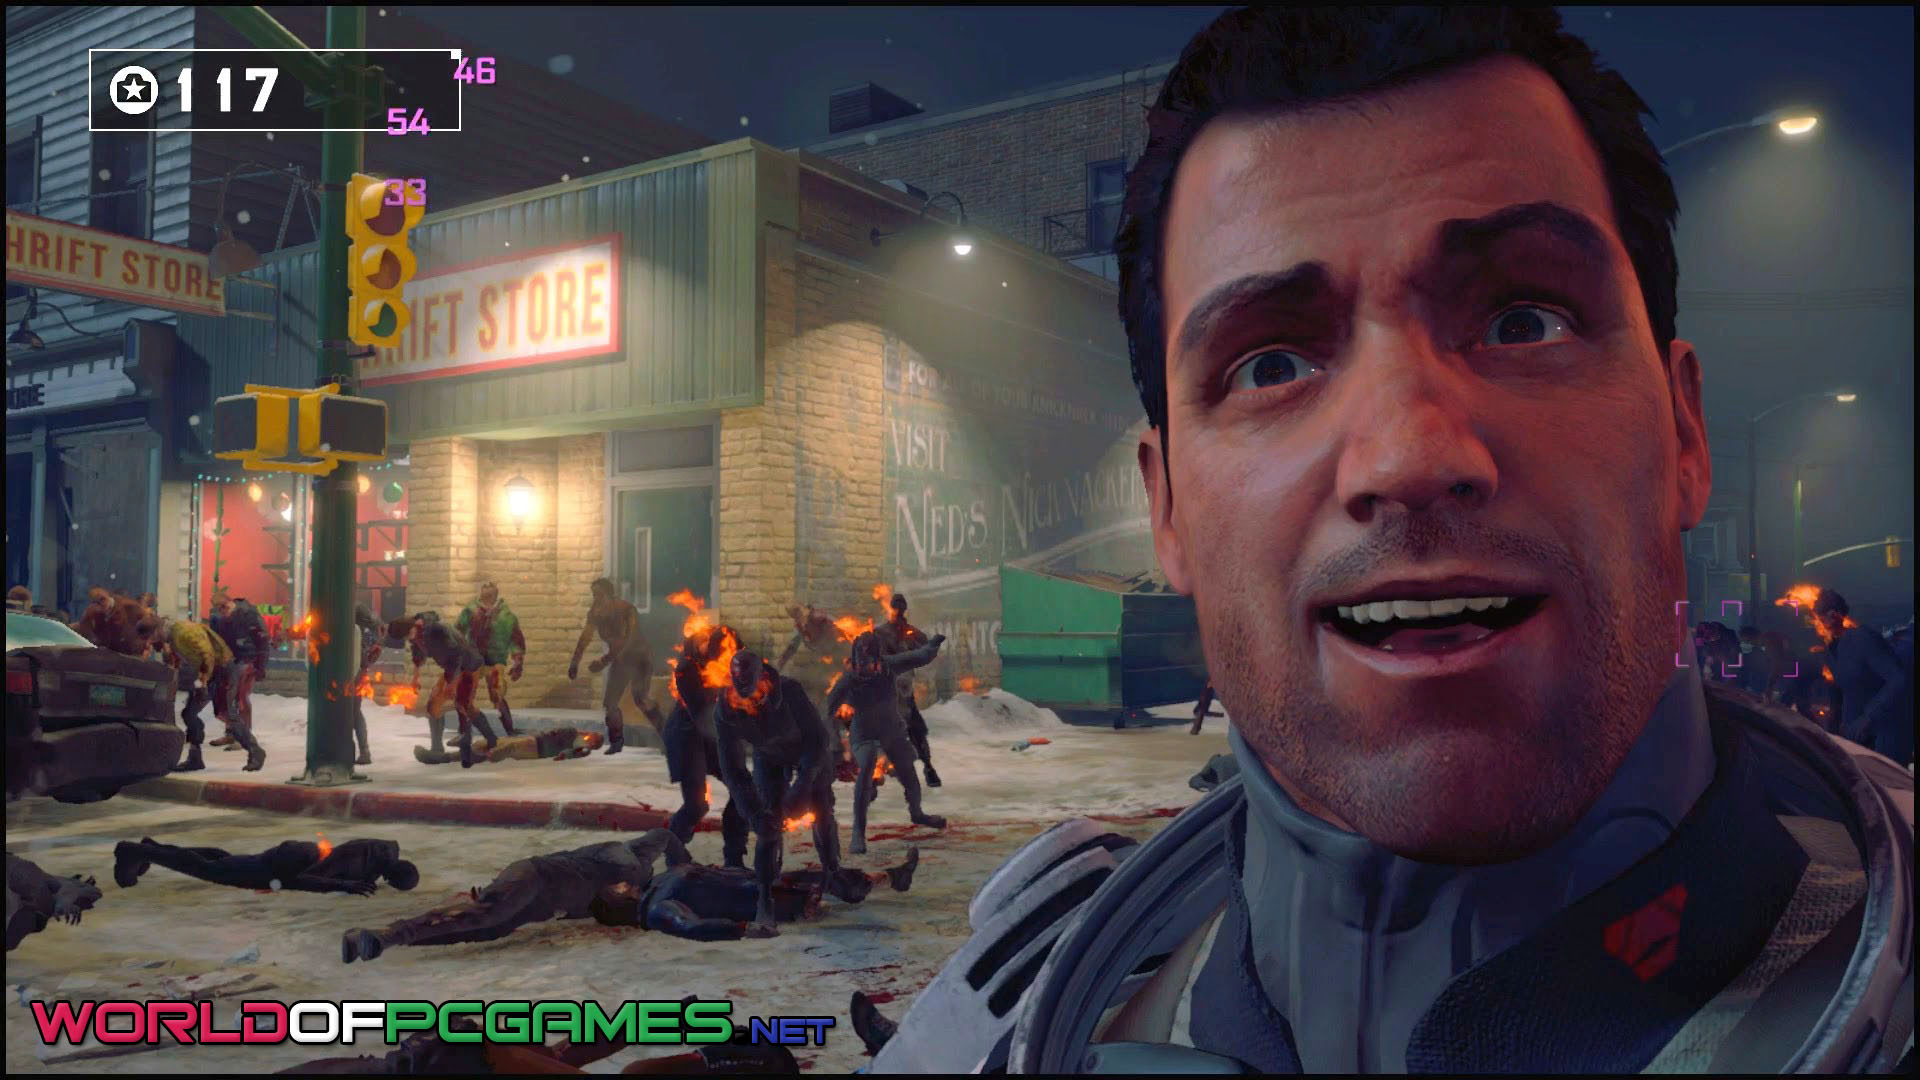 Dead Rising Free Download PC Game By worldof-pcgames.netm